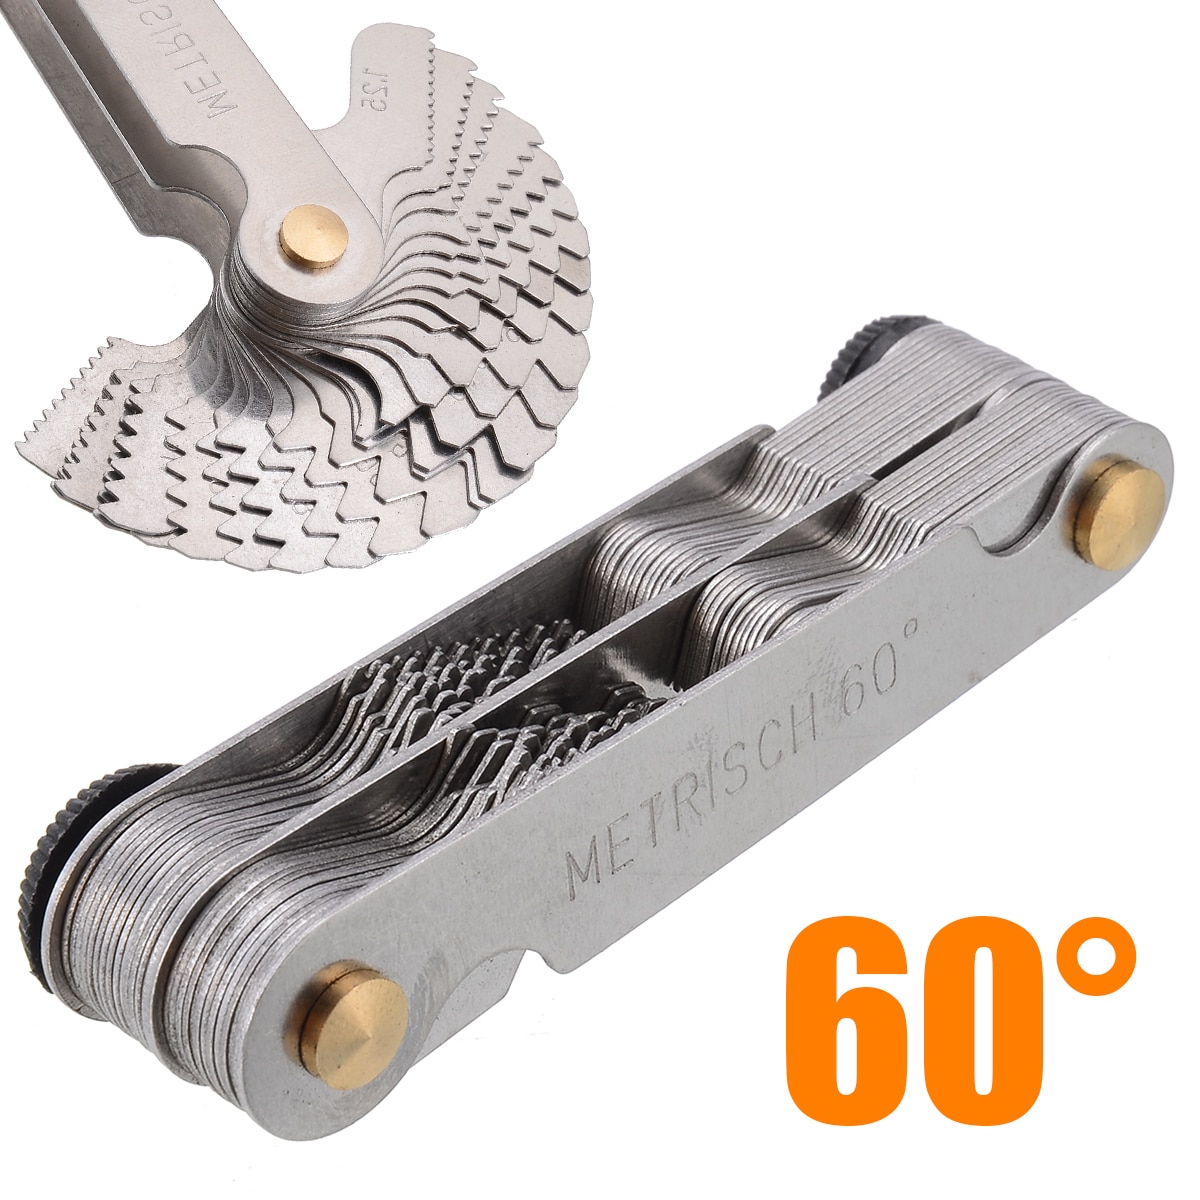 New 60 And 50 Degree Whitworth Metric Screw Thread Pitch Gauge Blade Gage For Measuring Tool